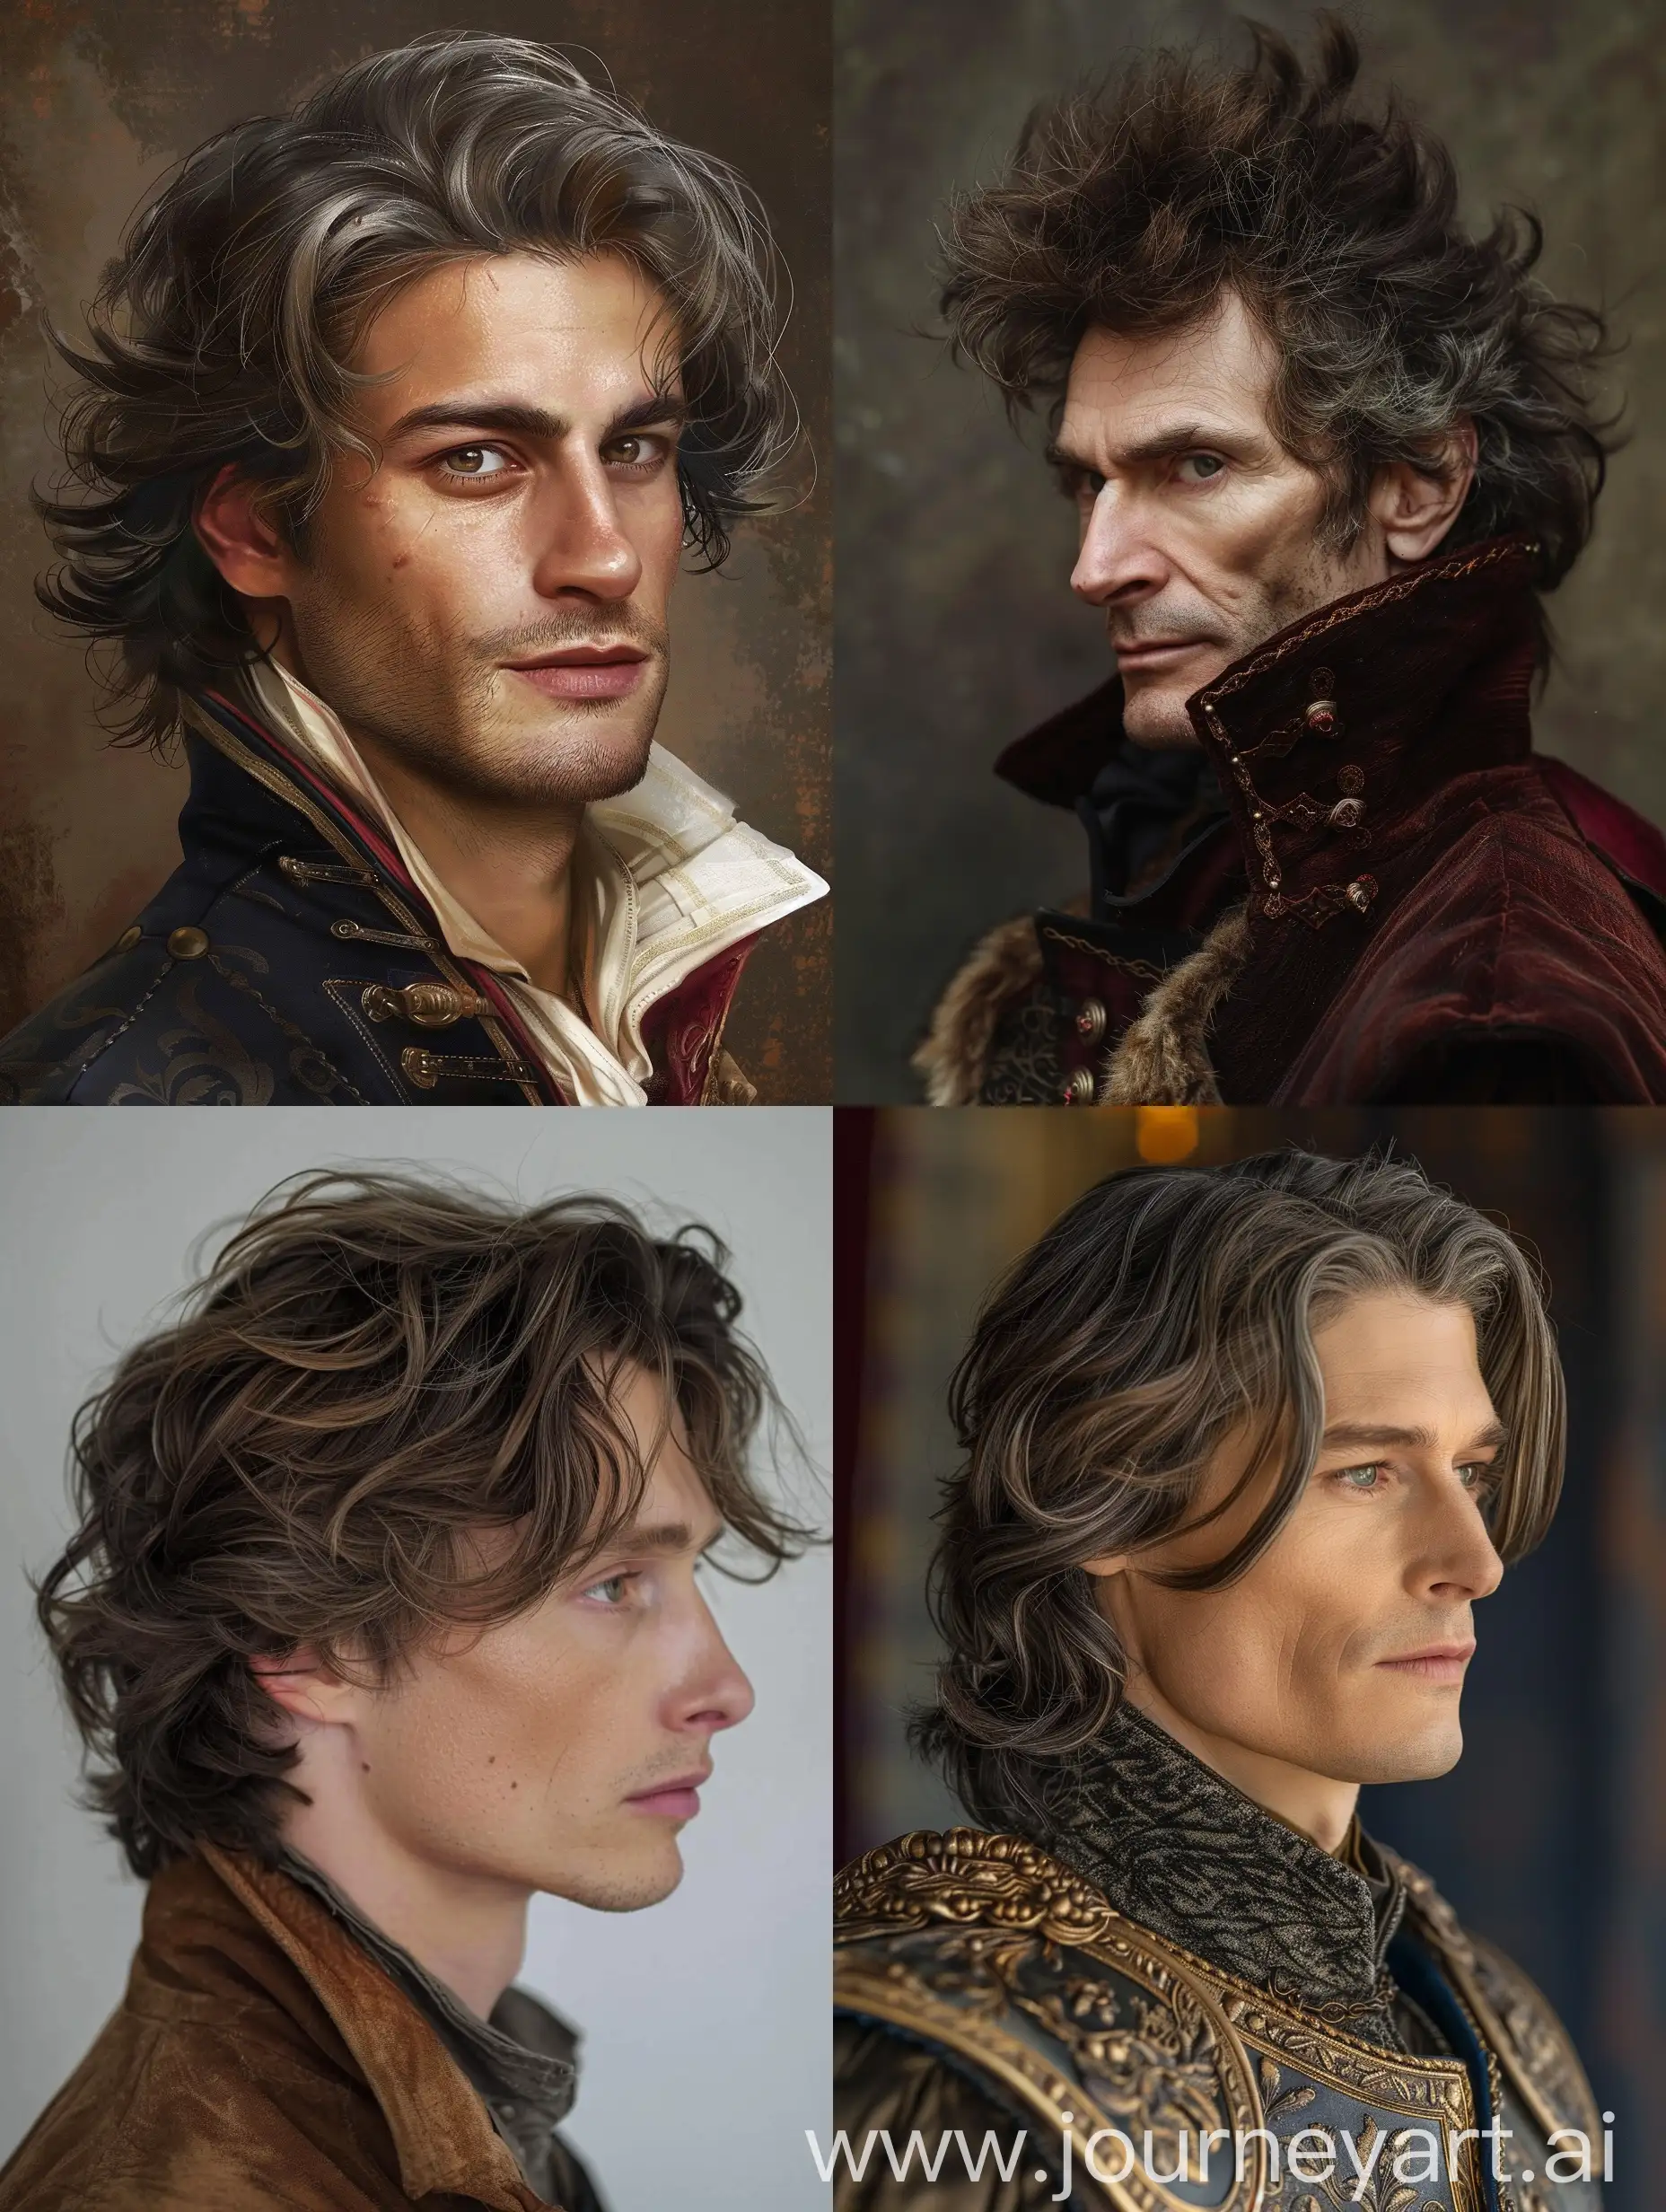 Madoc from the Cursed Prince by Holly Black, but with greying brown hair.